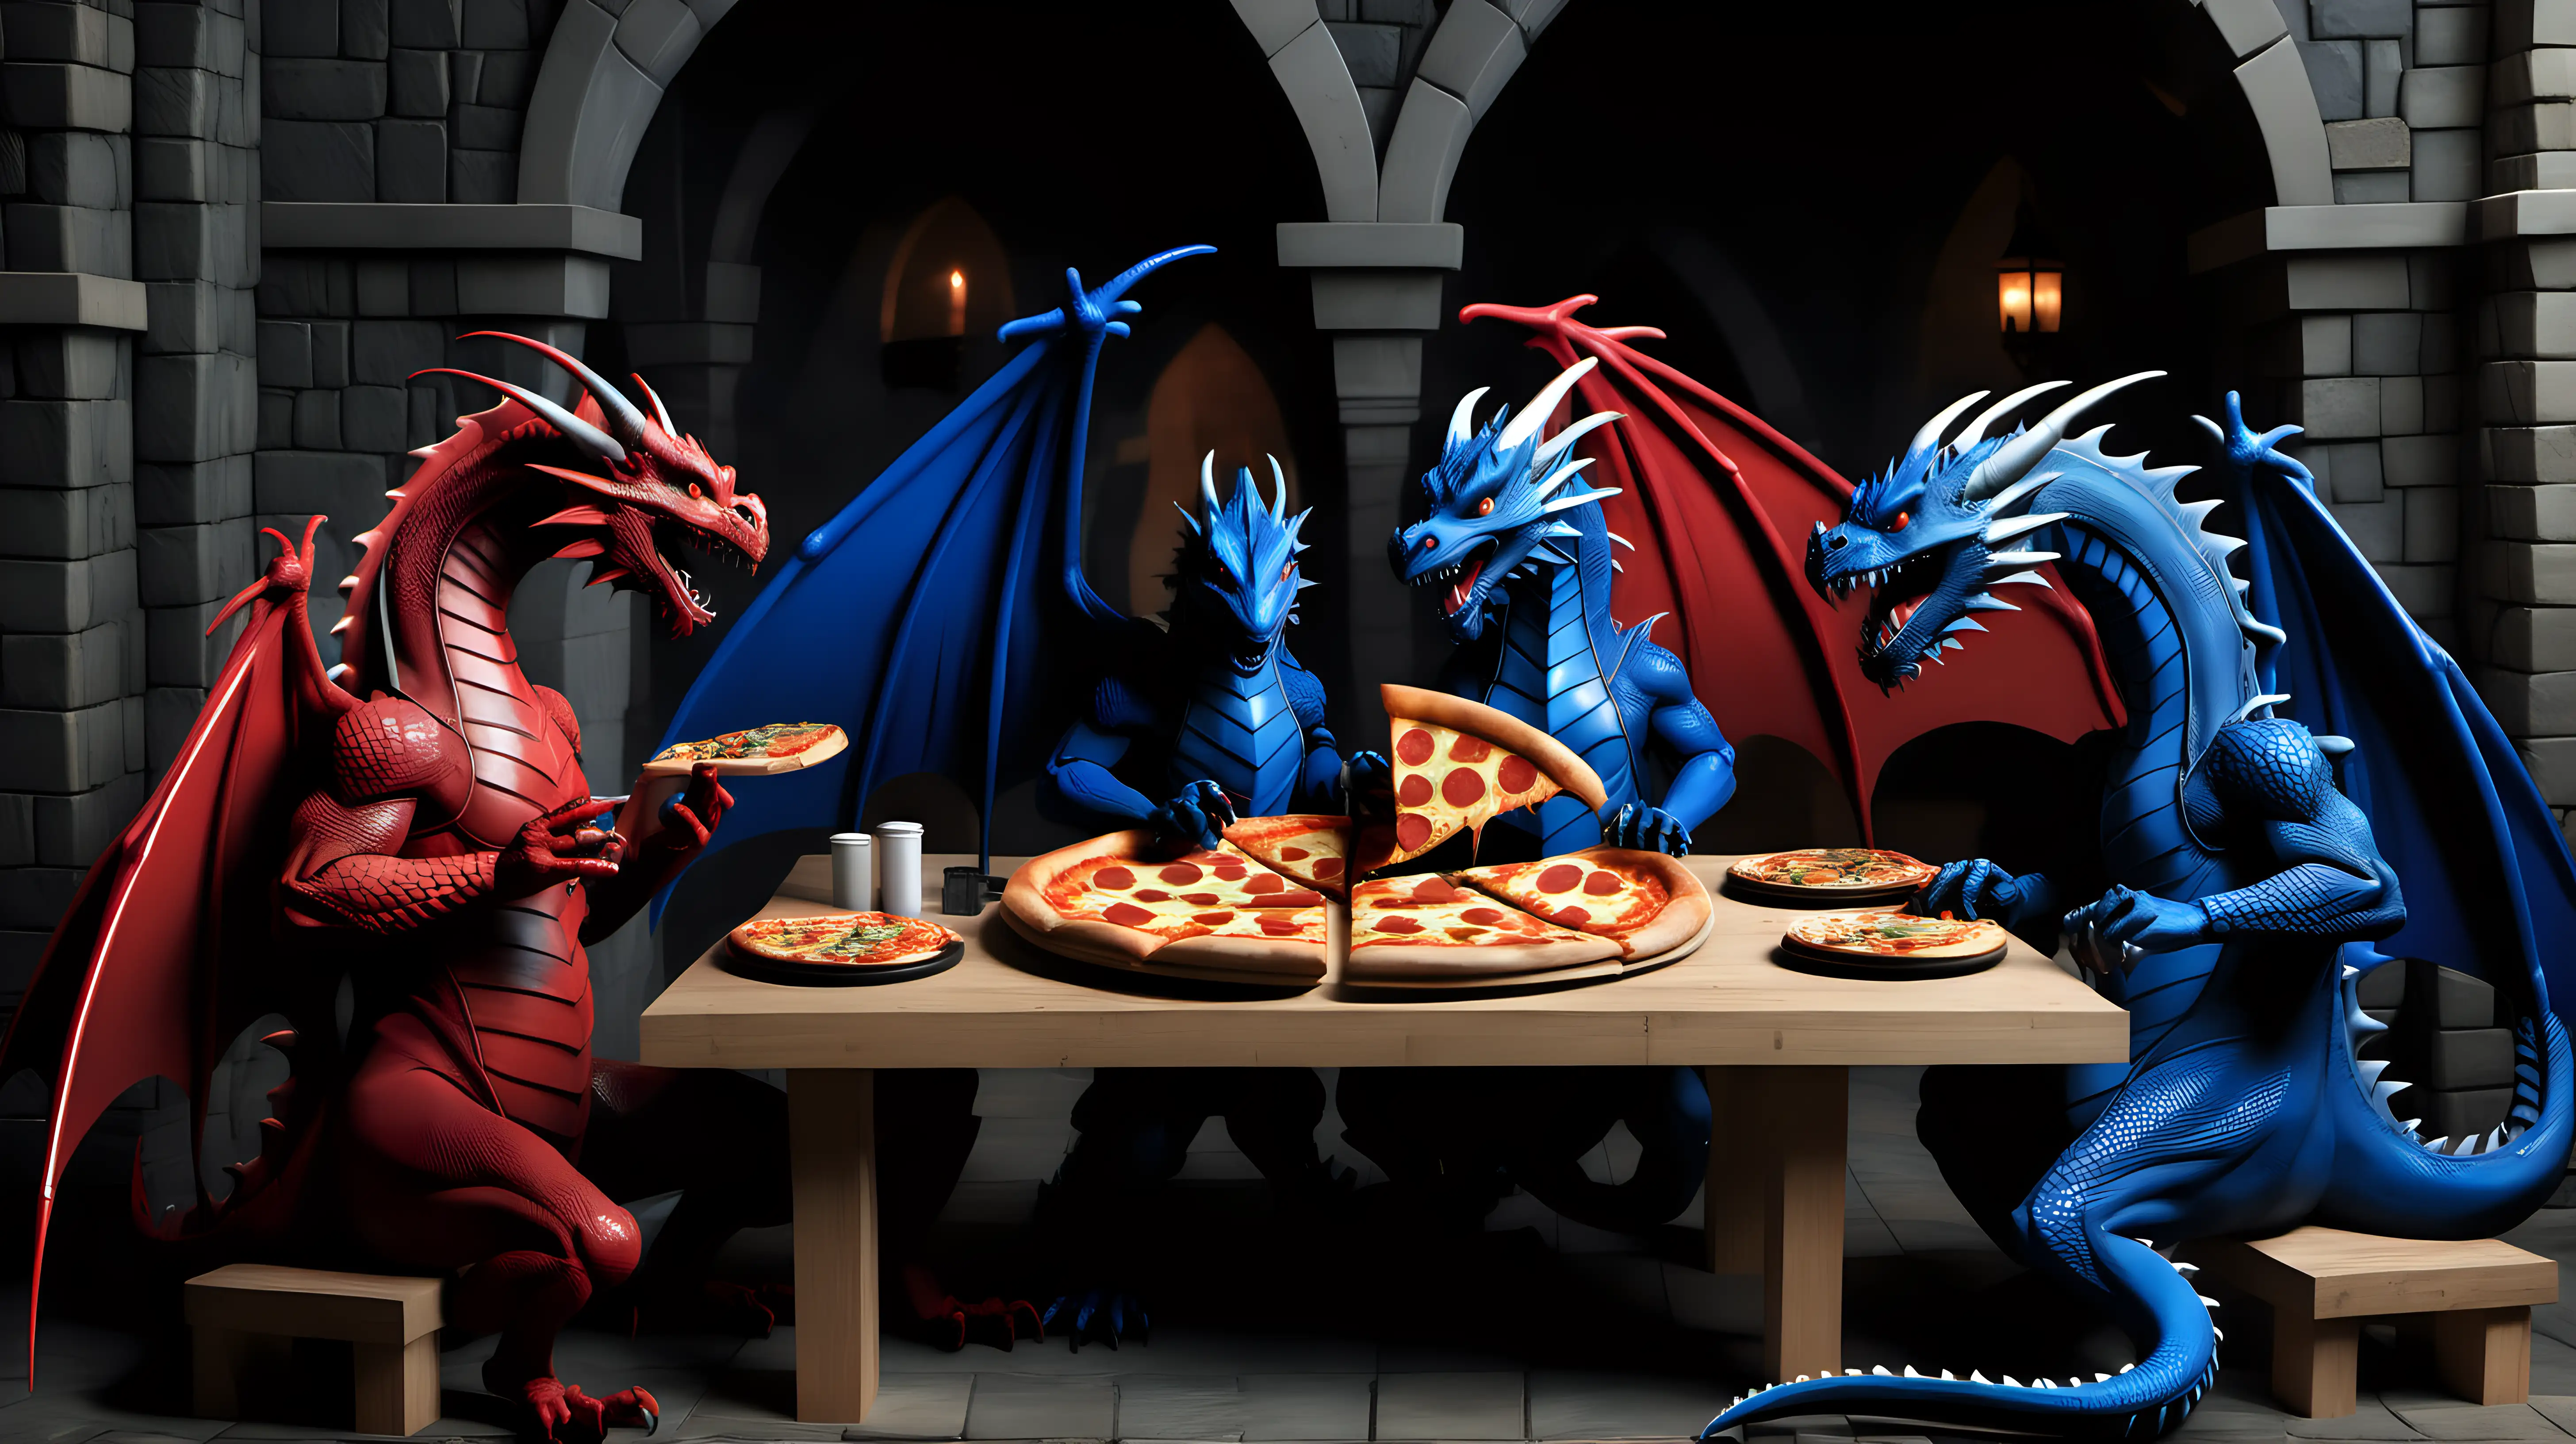 Dragons Feasting on Pizza Inside Castle